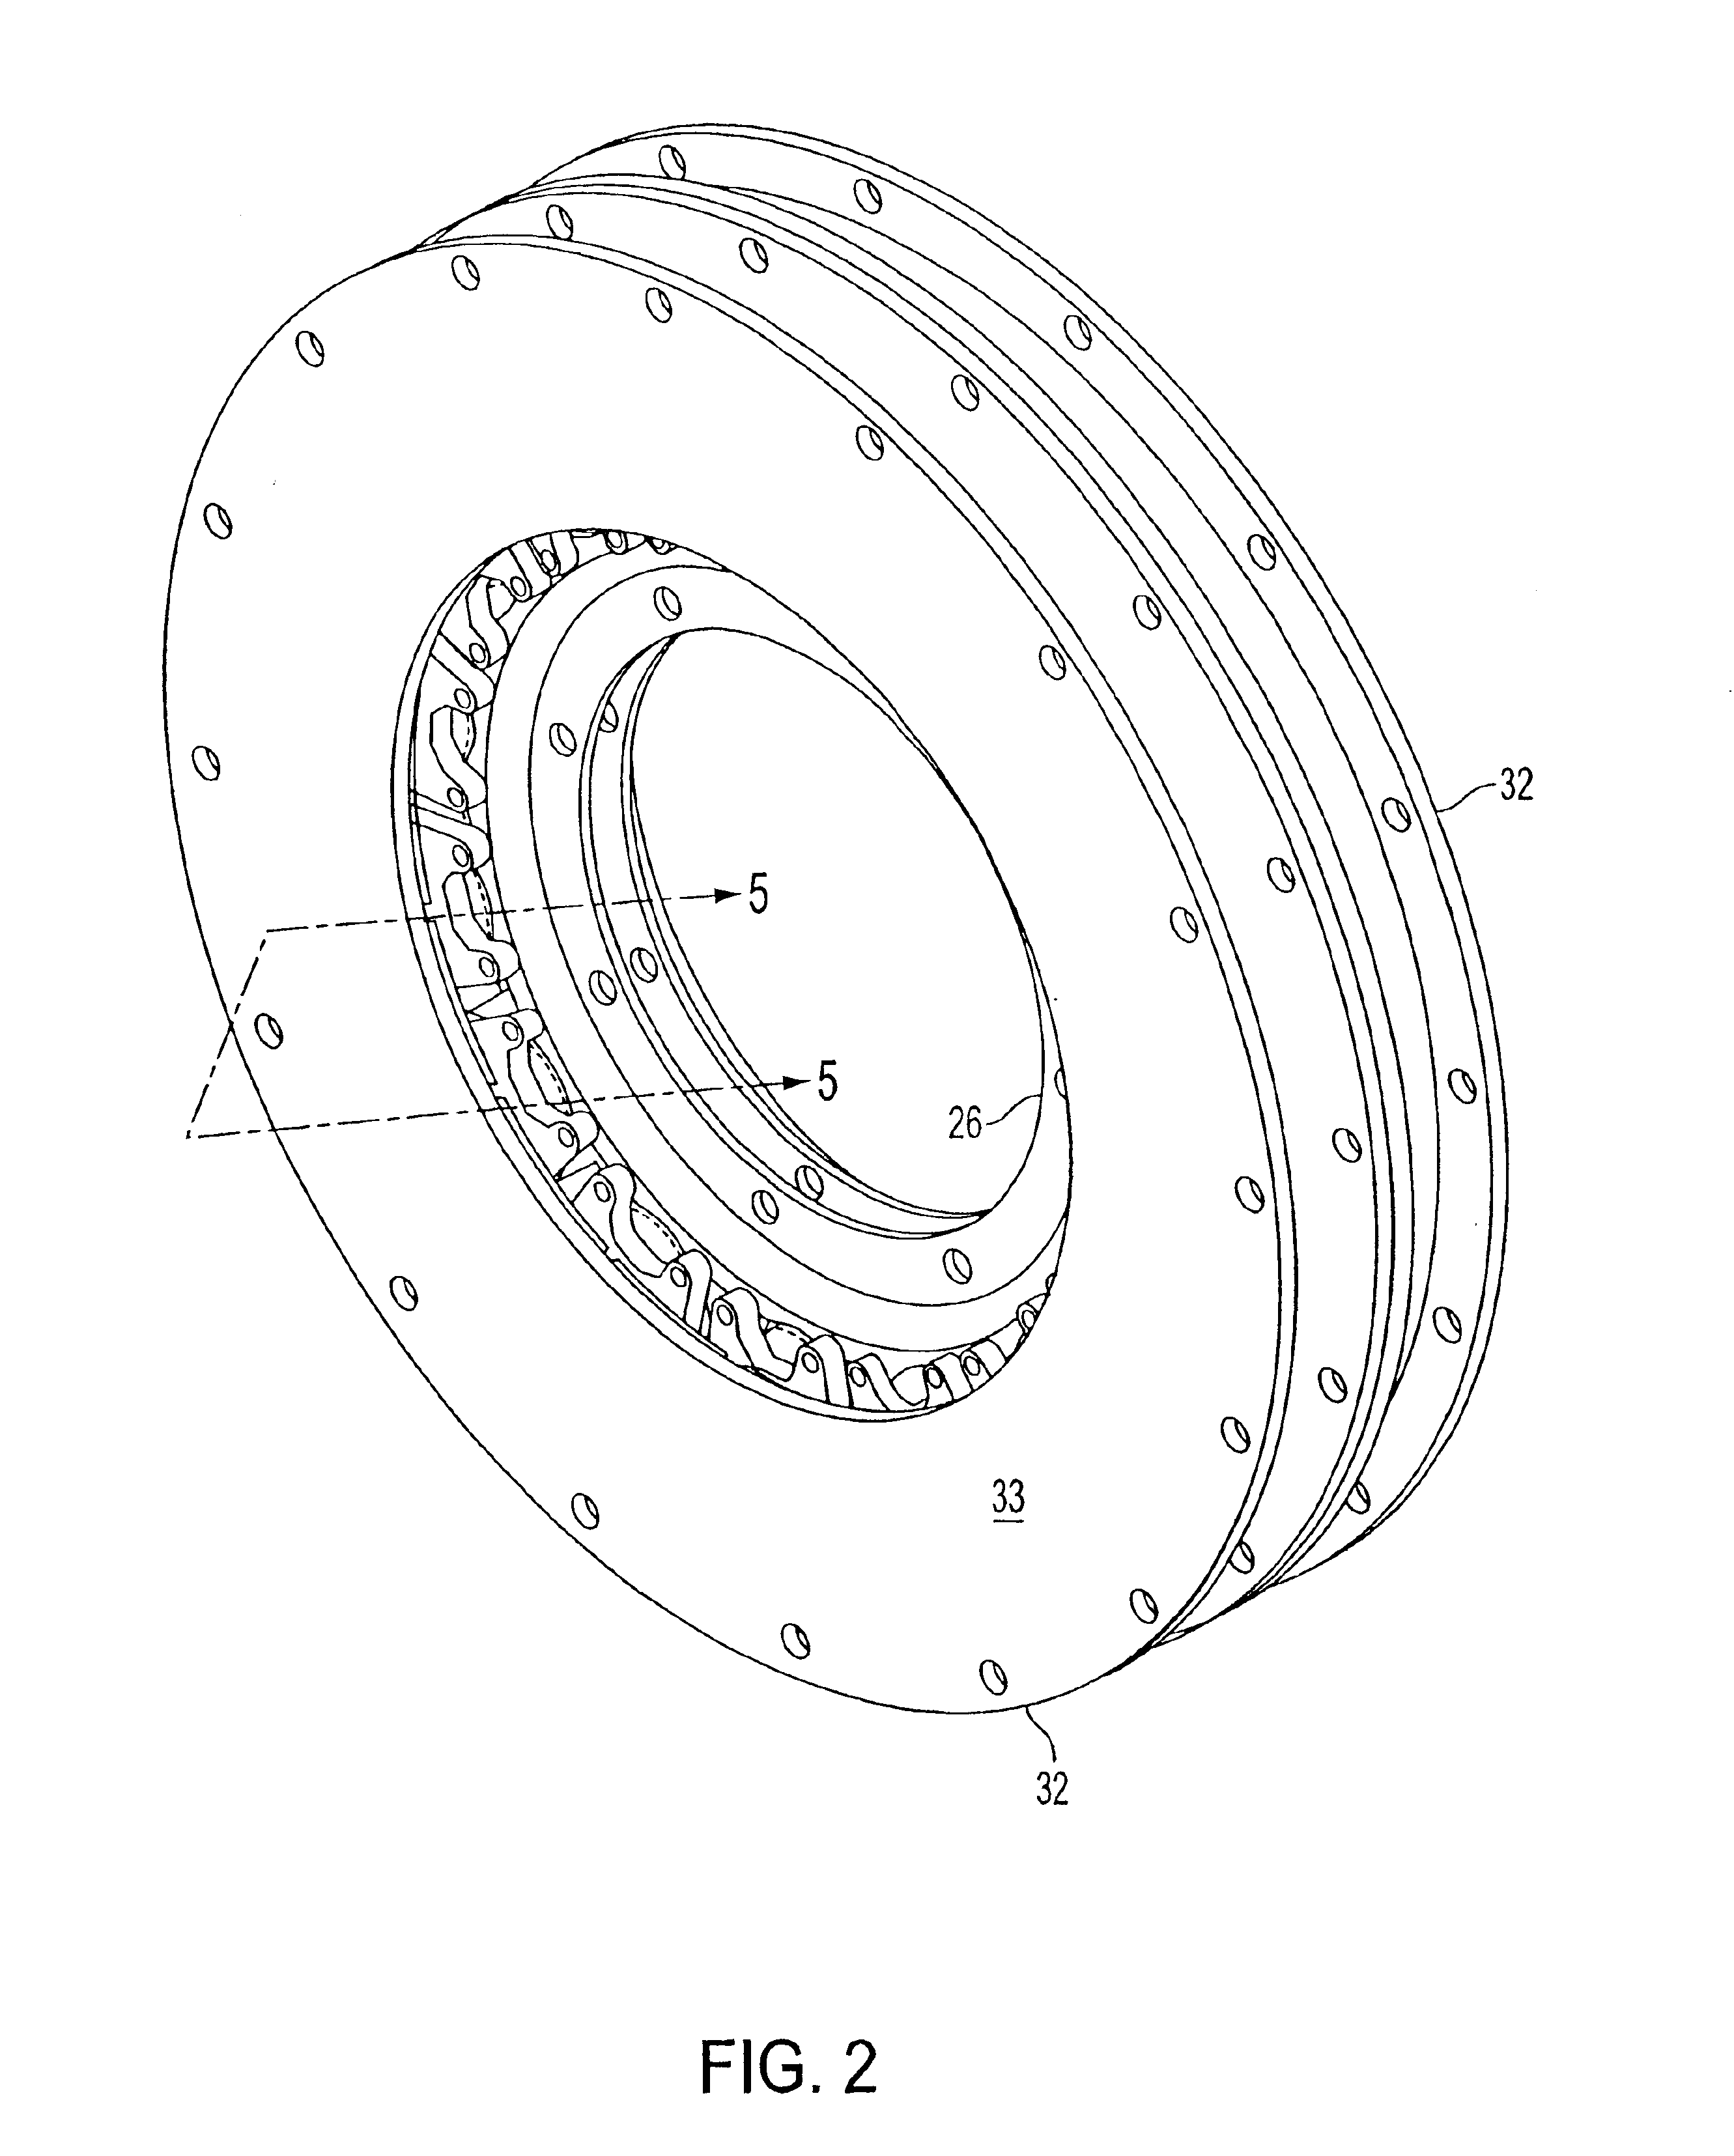 Rotary electric motor having both radial and axial air gap flux paths between stator and rotor segments